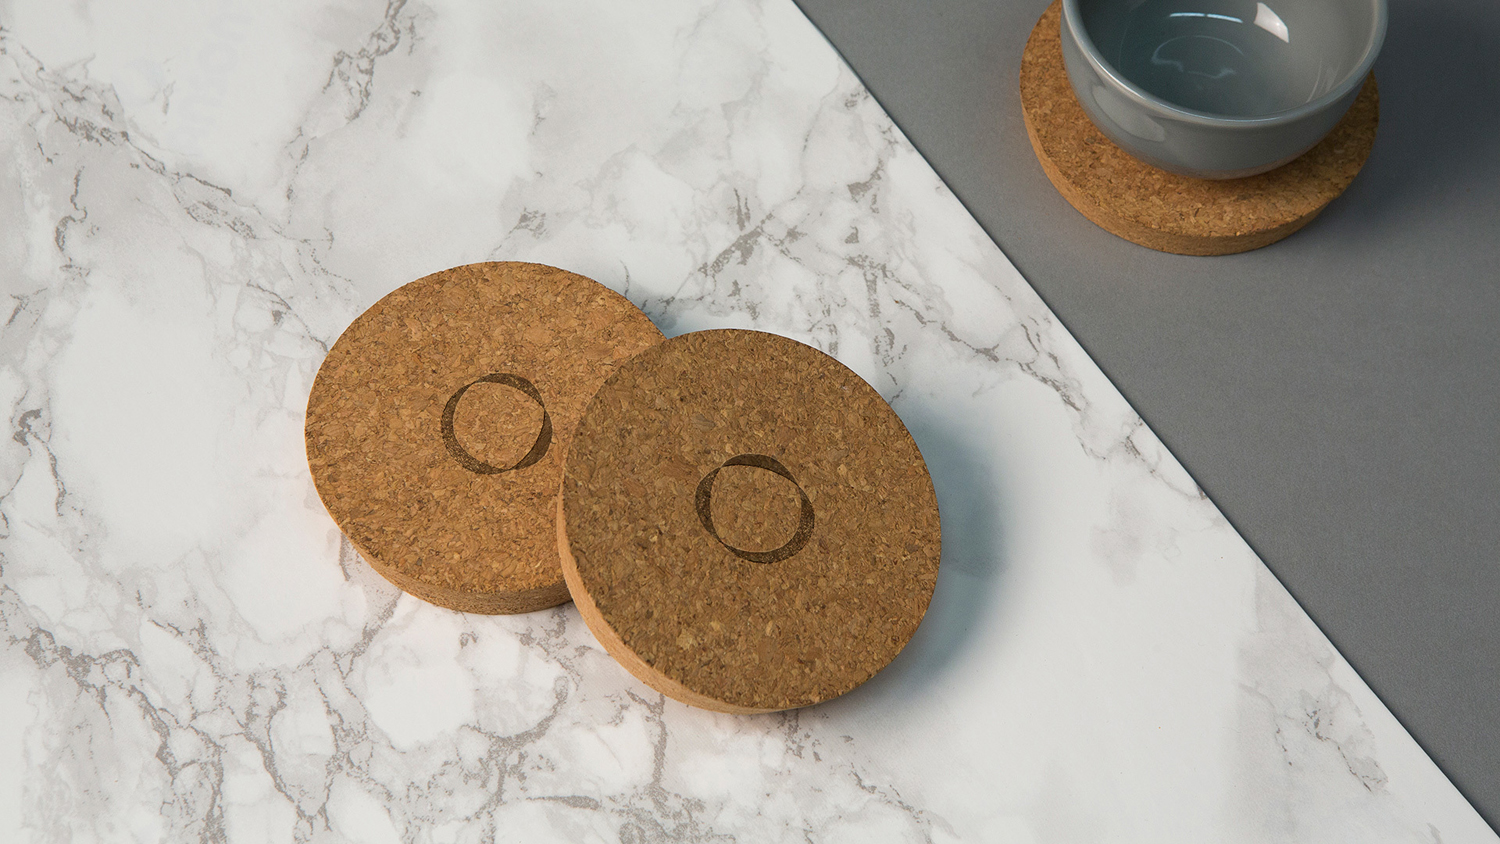 Logo and stamped cork coasters designed by Sagmeister & Walsh for contemporary restaurant Otium